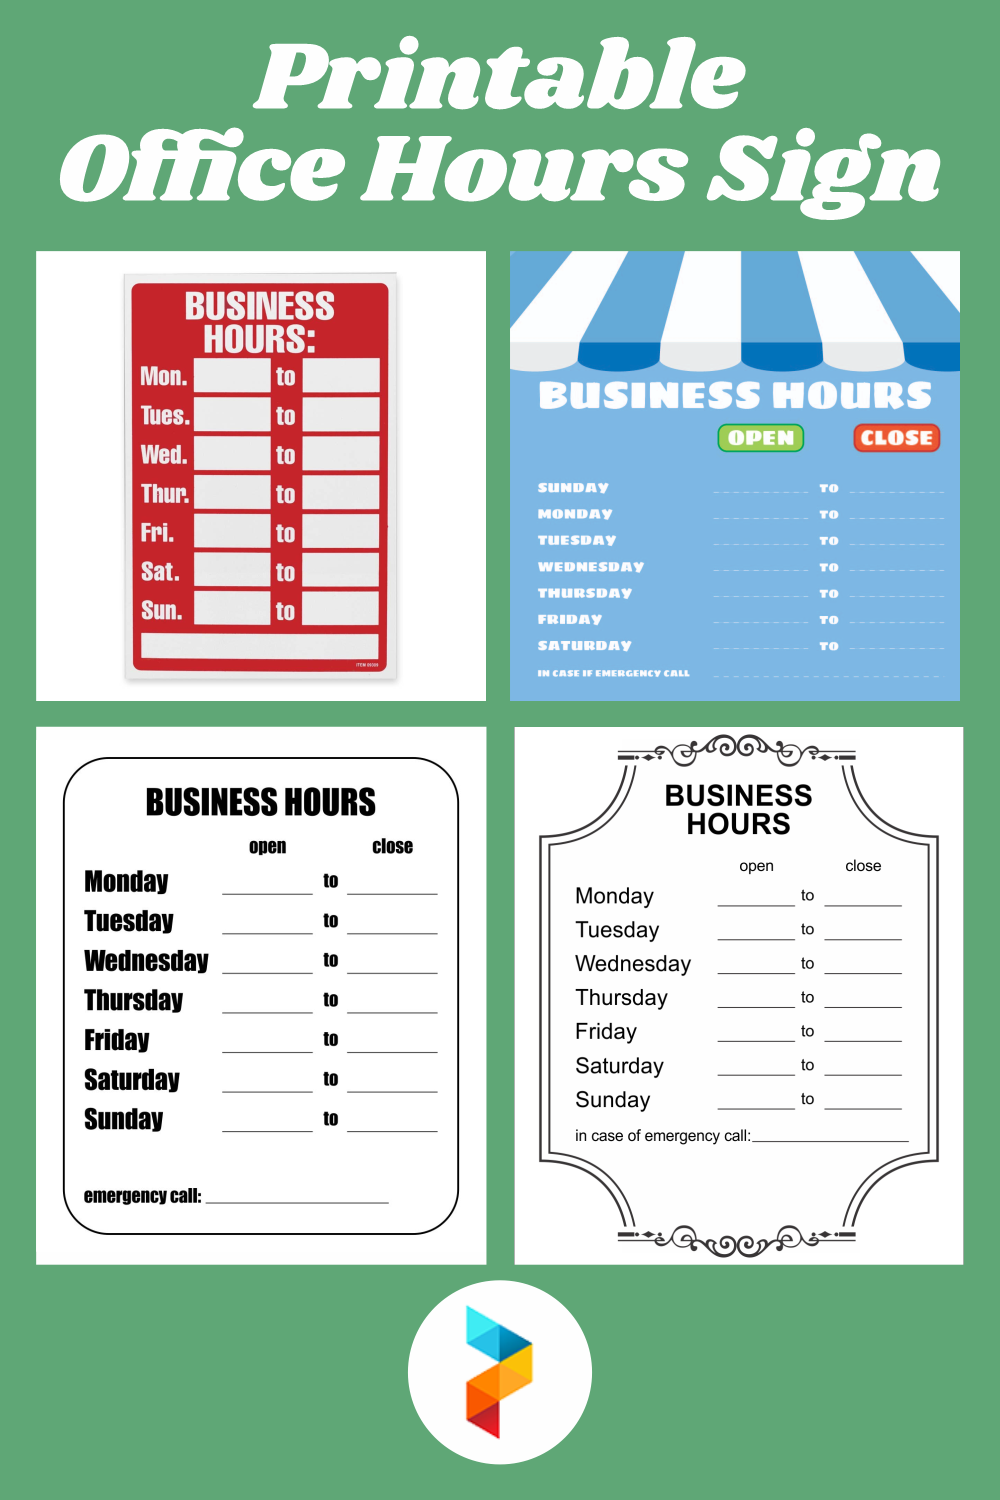 Printable Office Hours Sign